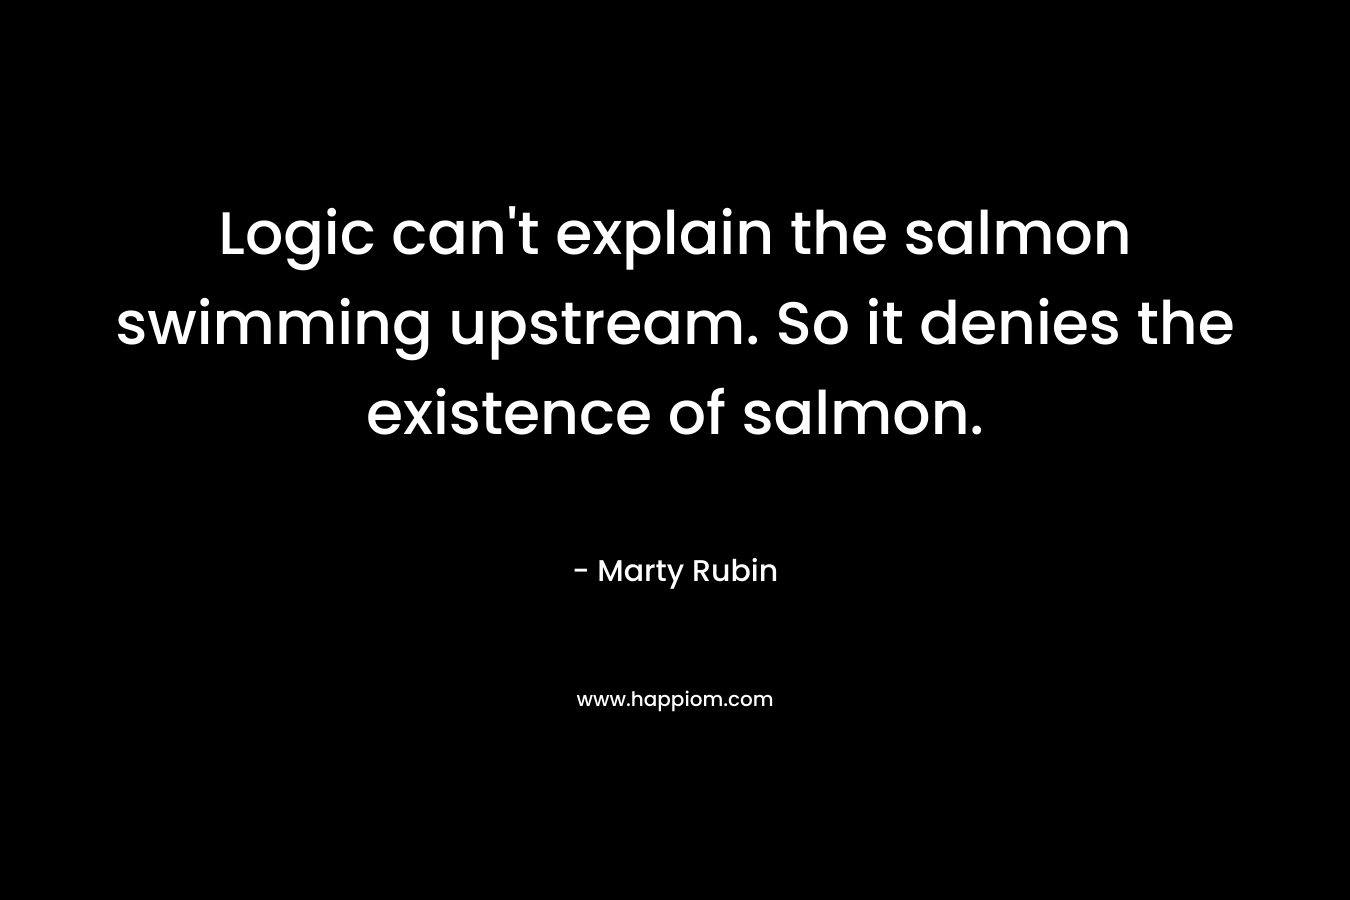 Logic can’t explain the salmon swimming upstream. So it denies the existence of salmon. – Marty Rubin